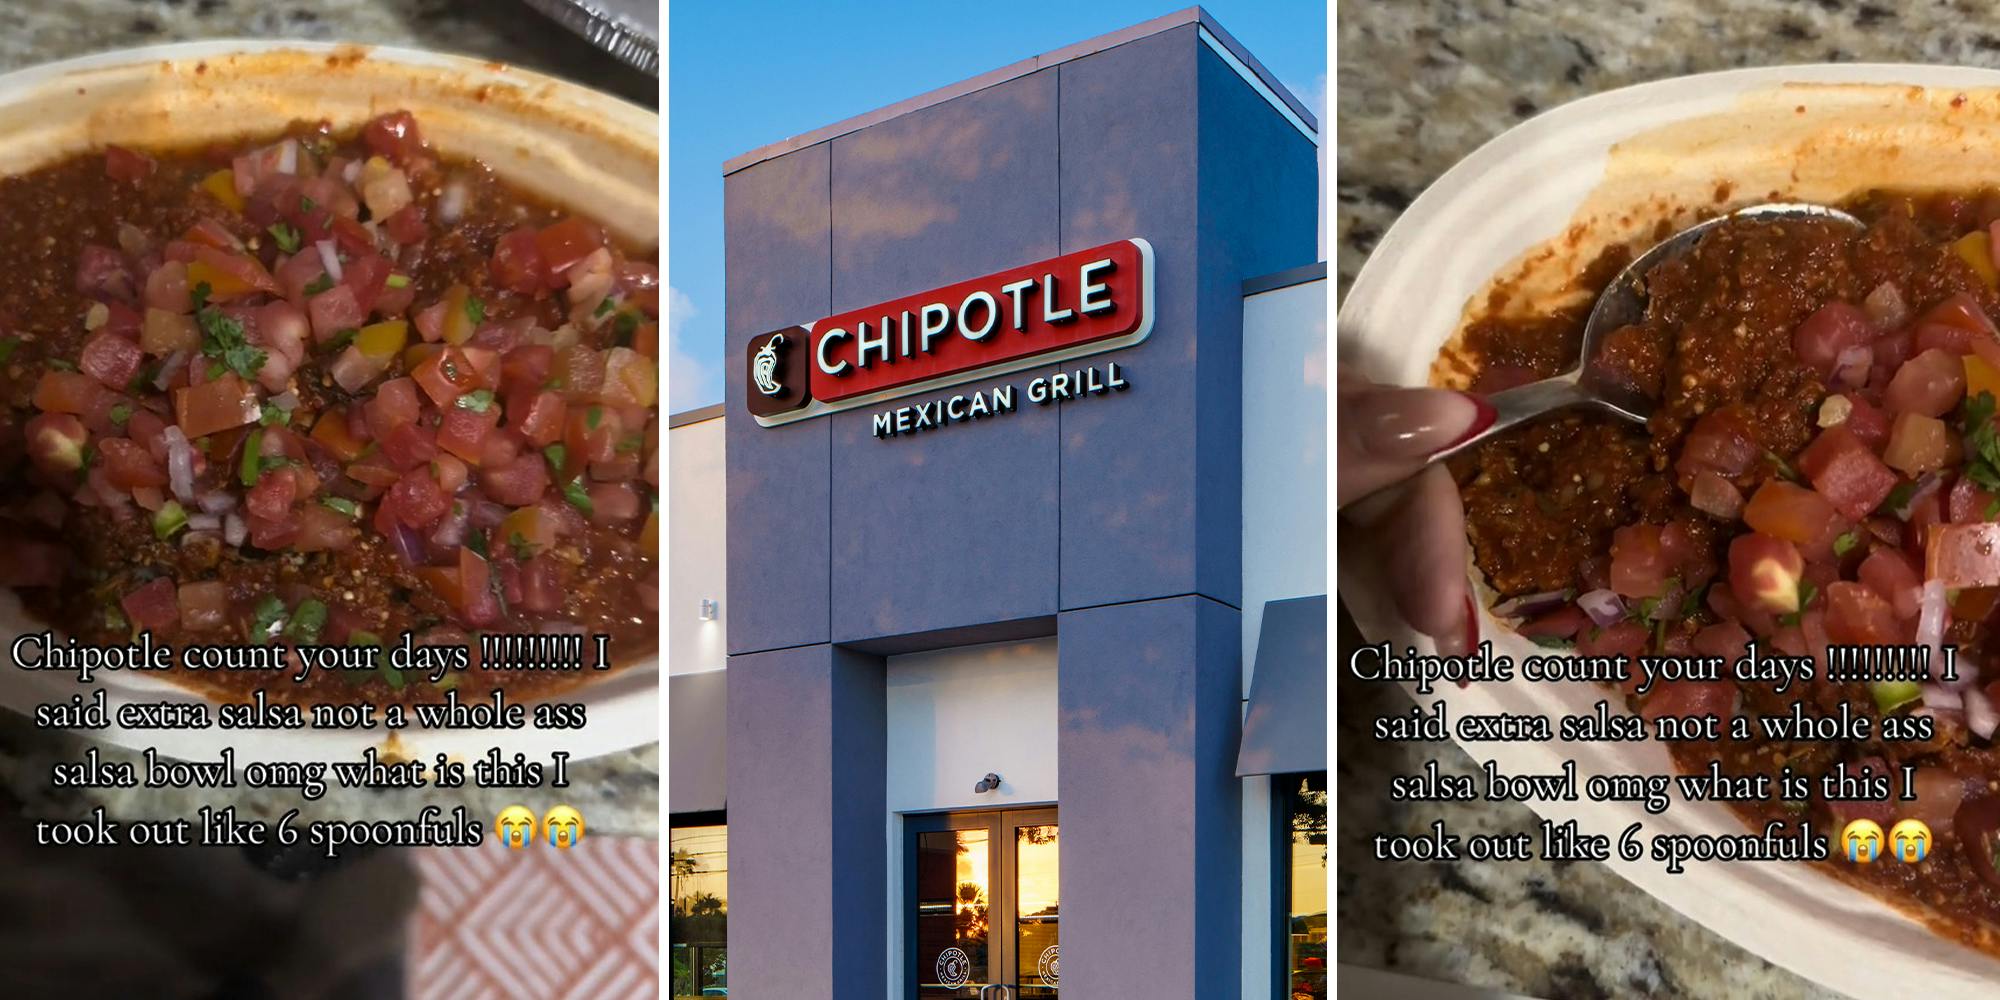 Chipotle customer asks for extra salsa, gets bamboozled